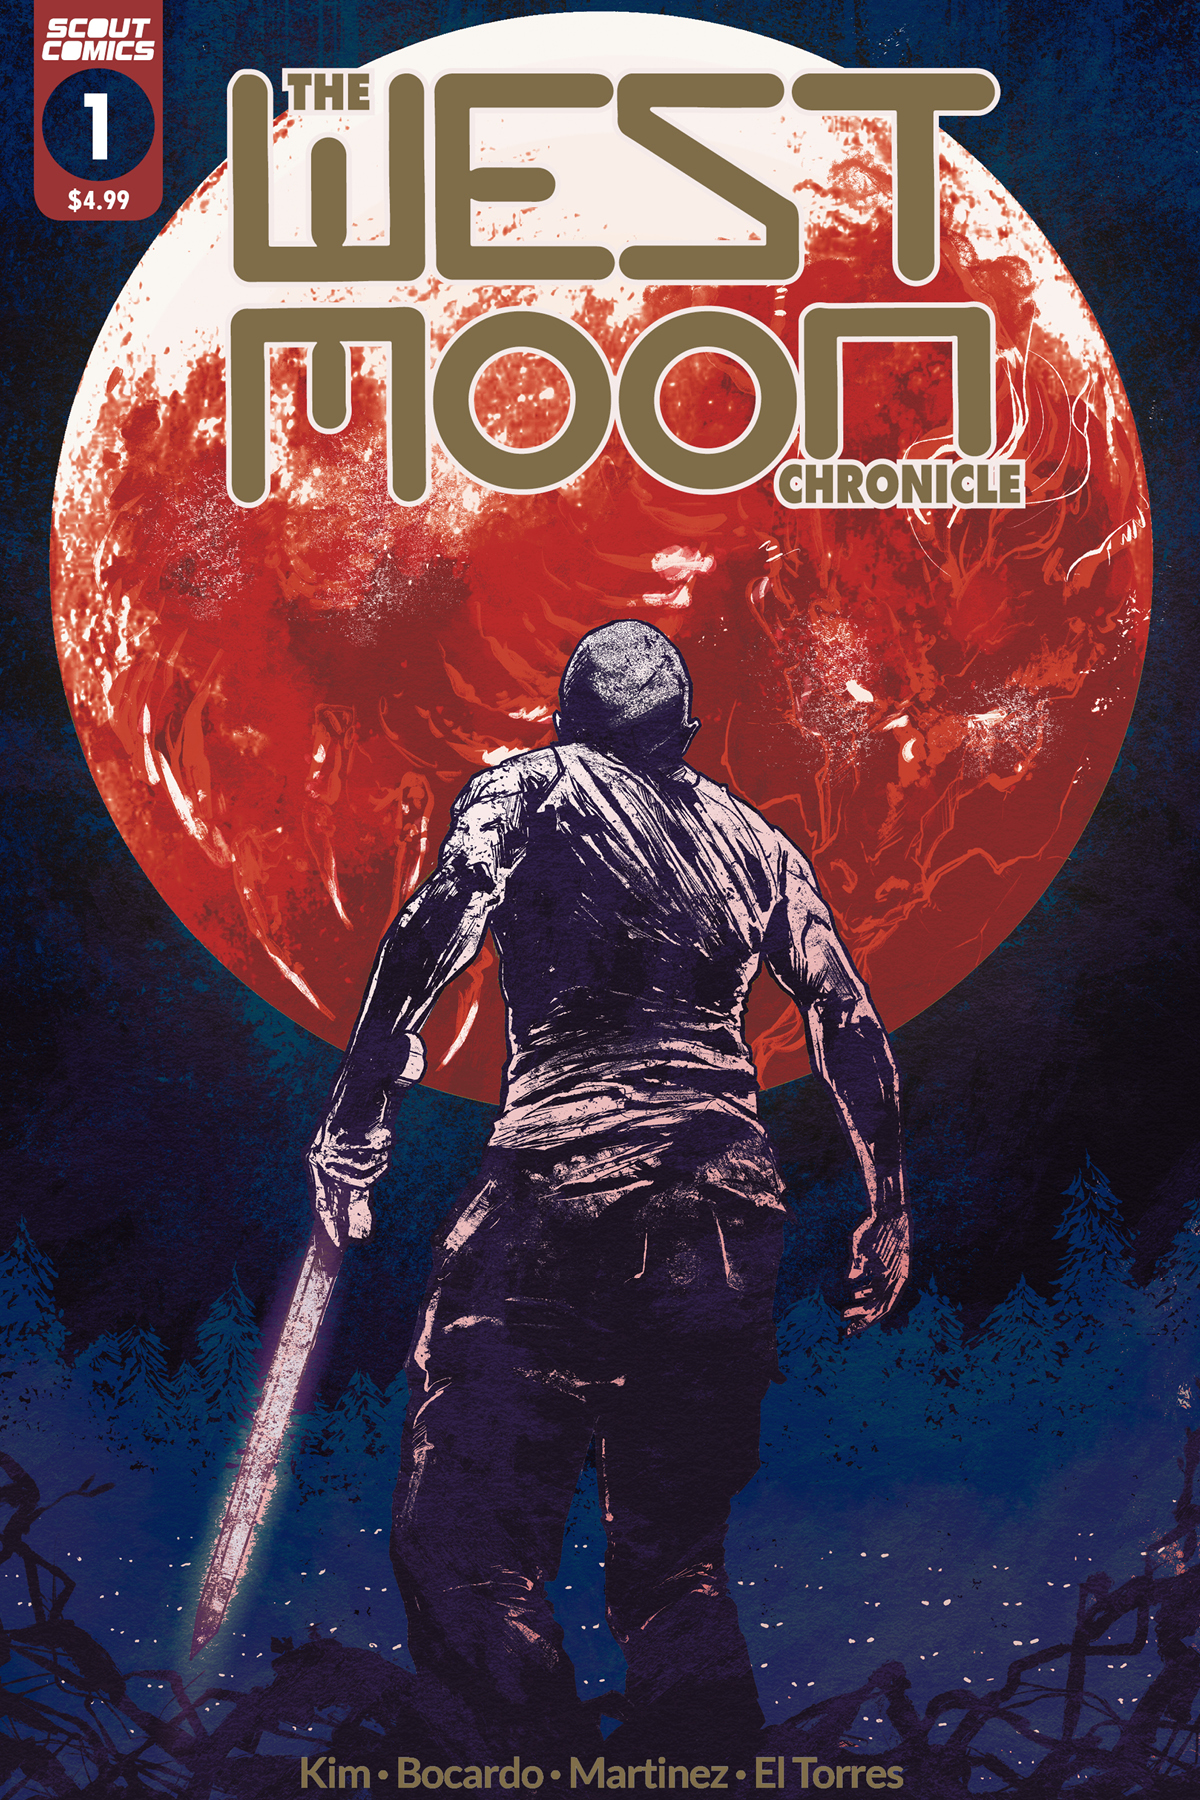 West Moon Chronicle #1 2nd Printing